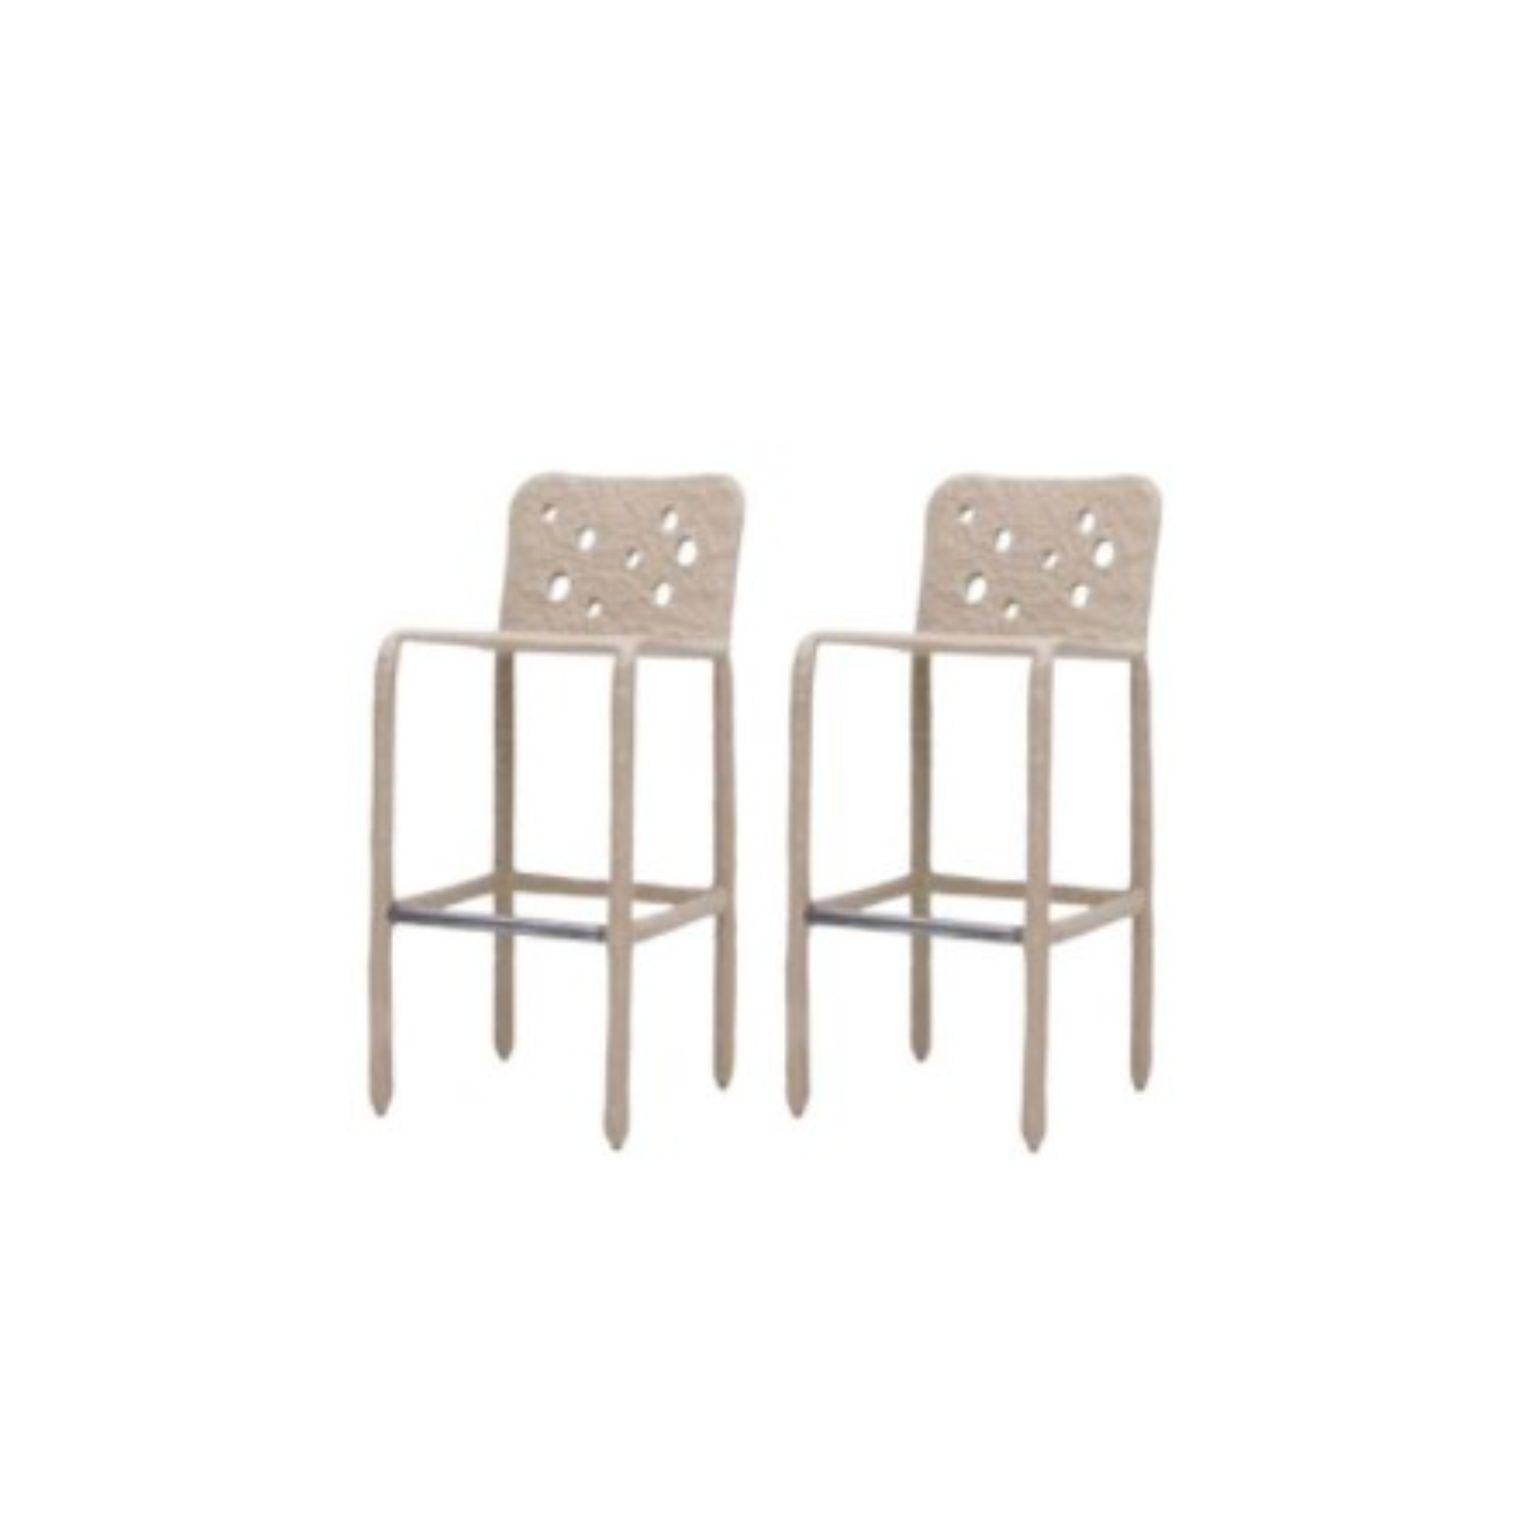 Set of 2 Outdoor beige sculpted contemporary chairs by Faina
Design: Victoriya Yakusha
Material: steel, flax rubber, biopolymer, cellulose
Dimensions: Height: 106 x Width: 45 x Sitting place width: 49 Legs height: 80 cm
Weight: 20